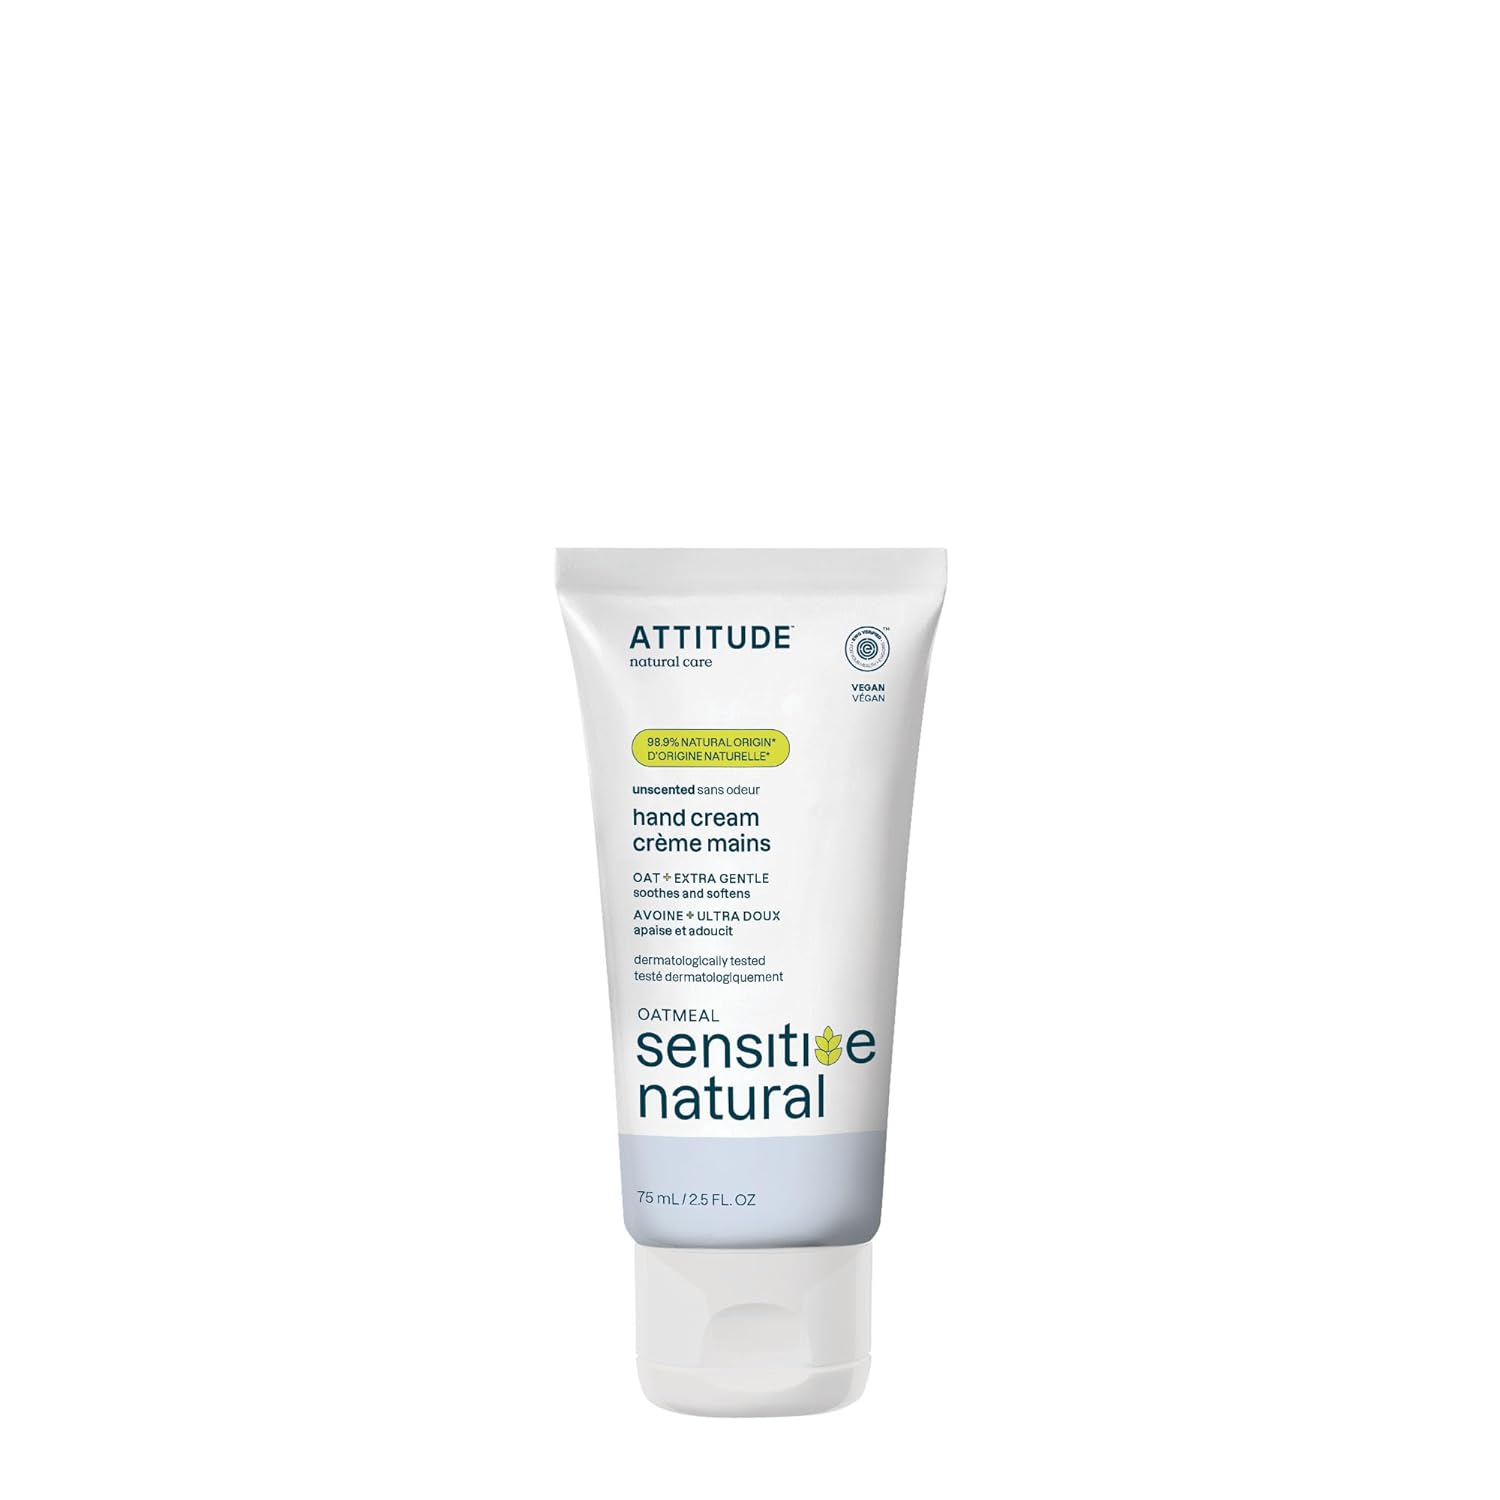 ATTITUDE Hand Cream for Sensitive Skin with Oat, EWG Verified, Dermatologically Tested, Vegan, Unscented, 2.5 Fl Oz